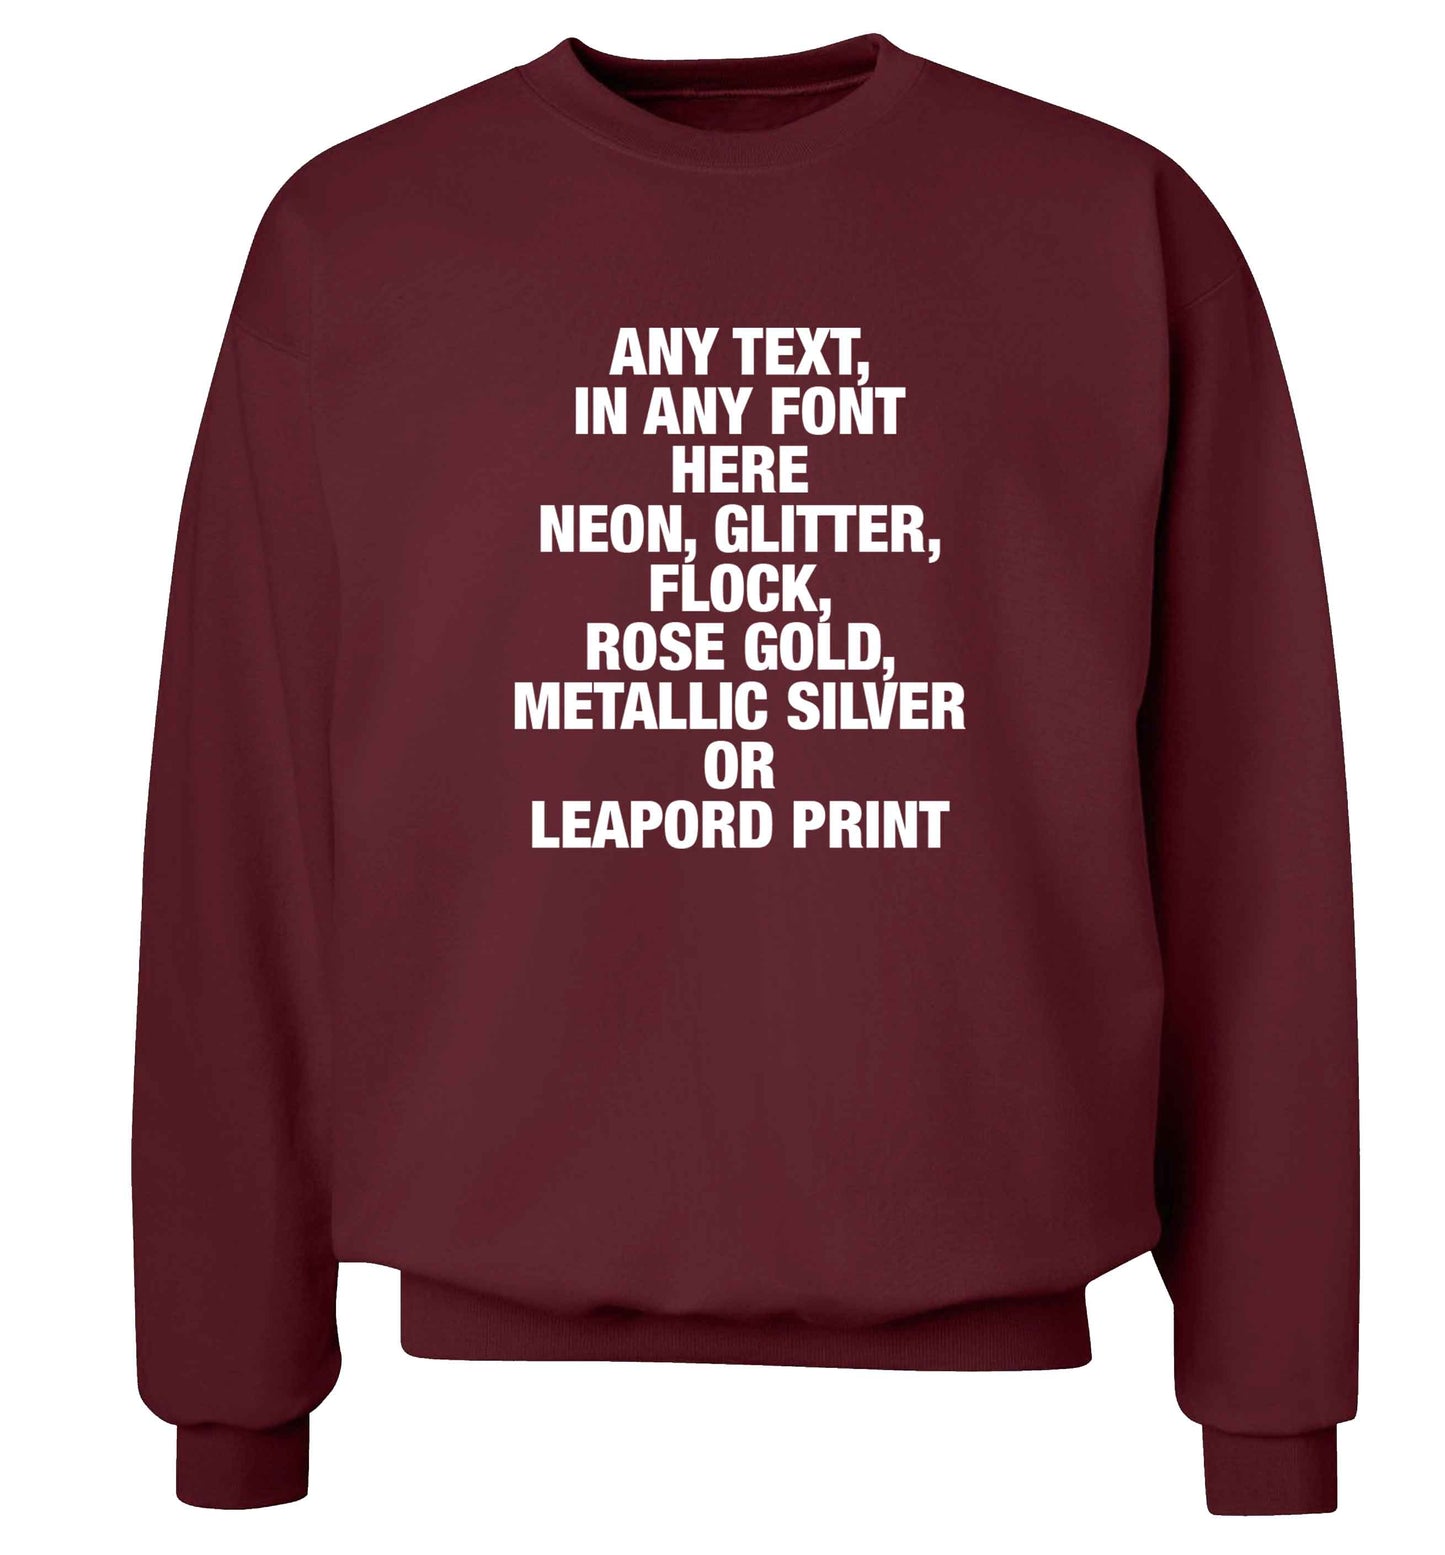 Premium custom order any text colour and font adult's unisex maroon sweater 2XL